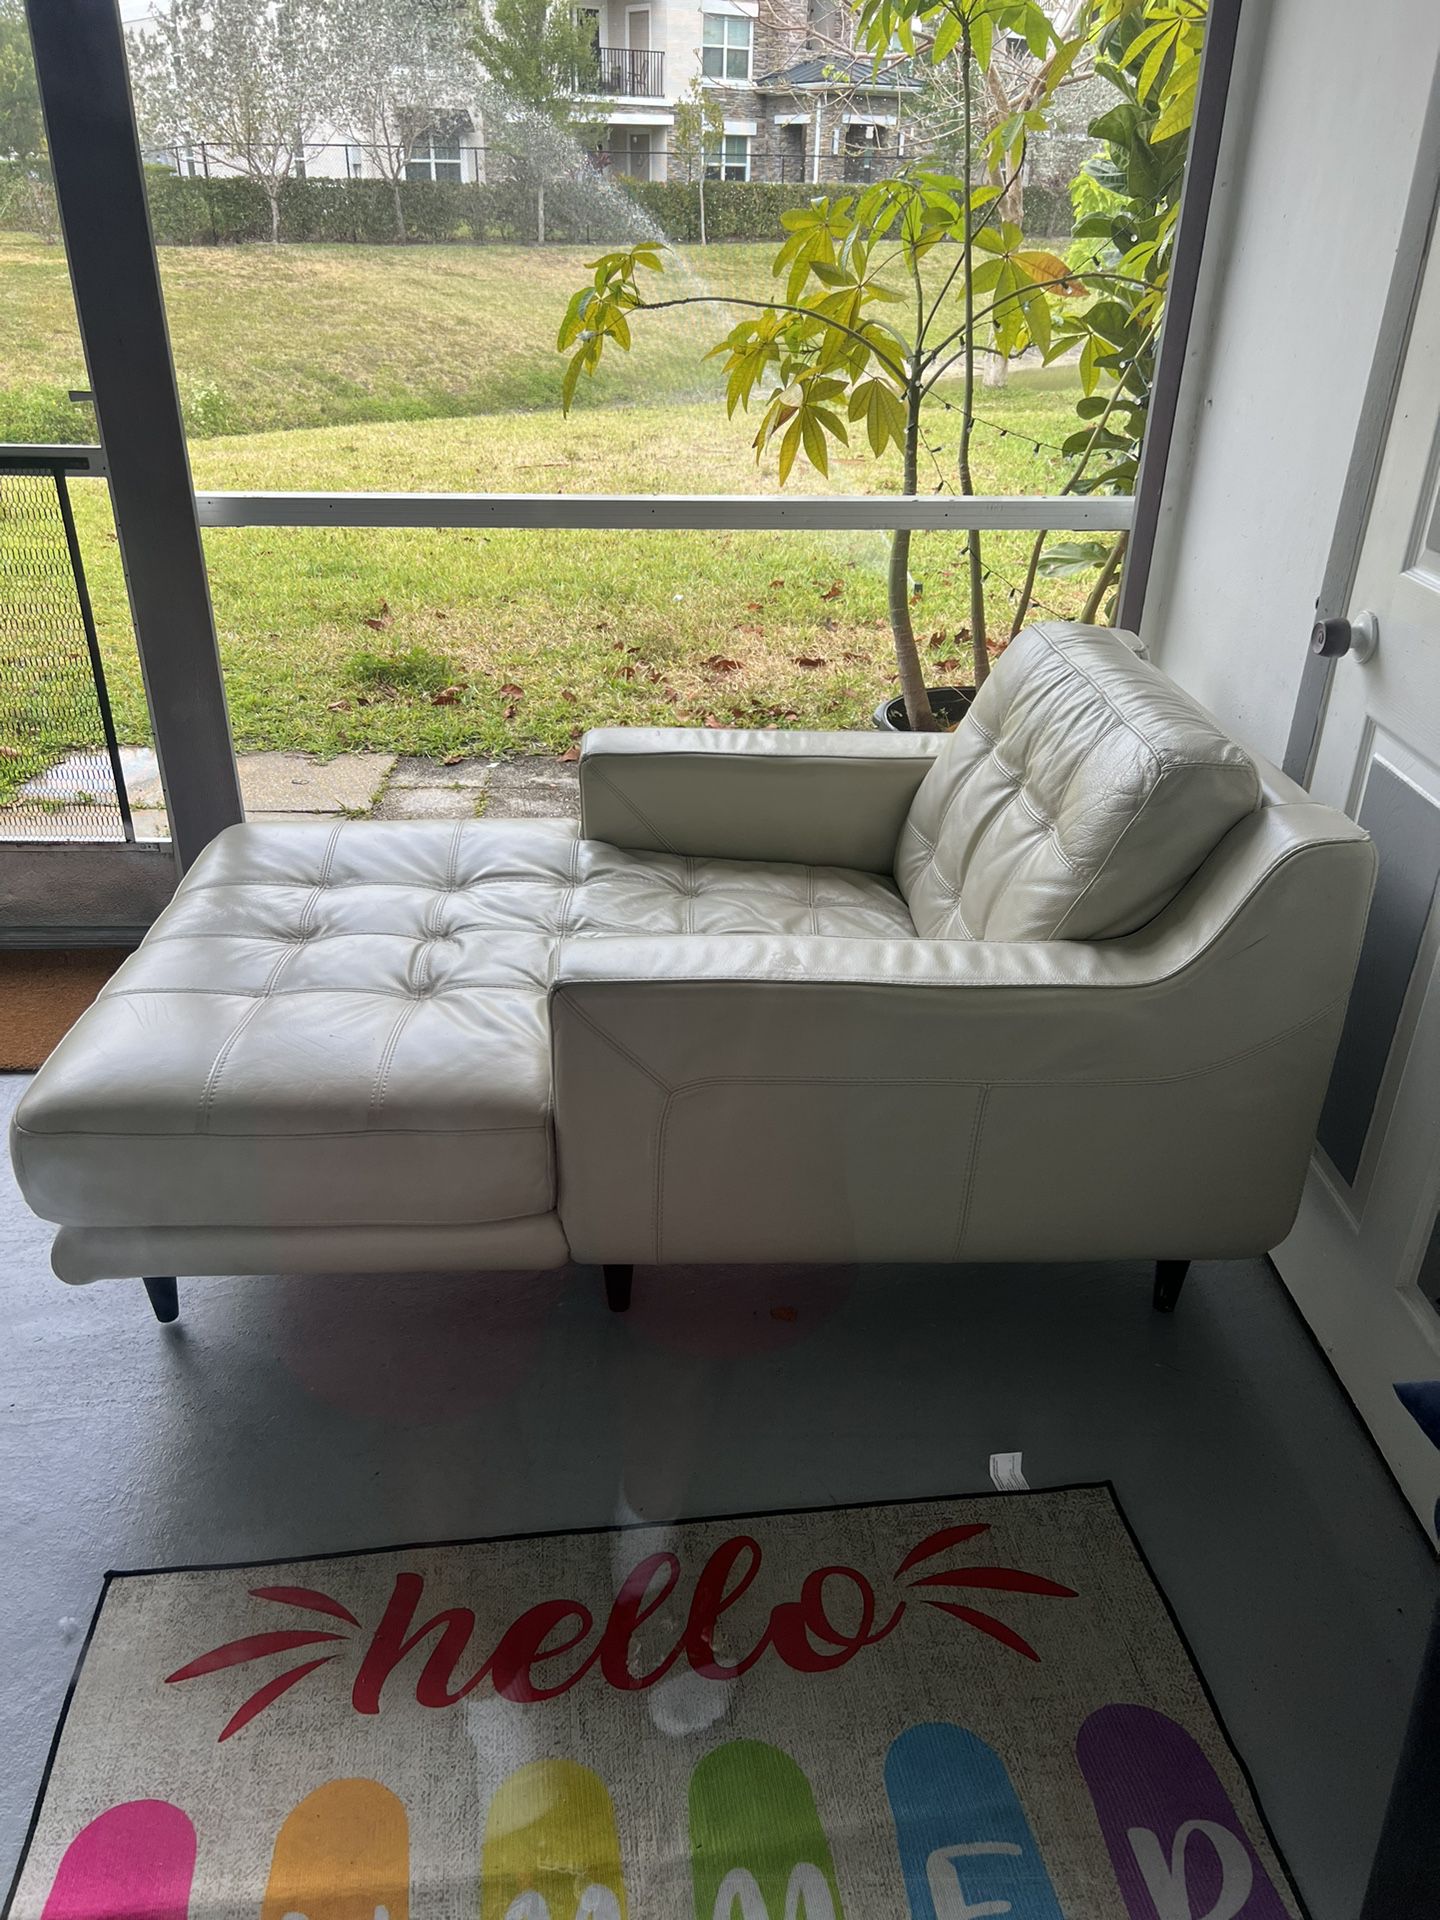 Leather Lounge Chair In Good Condition Excellent $150 